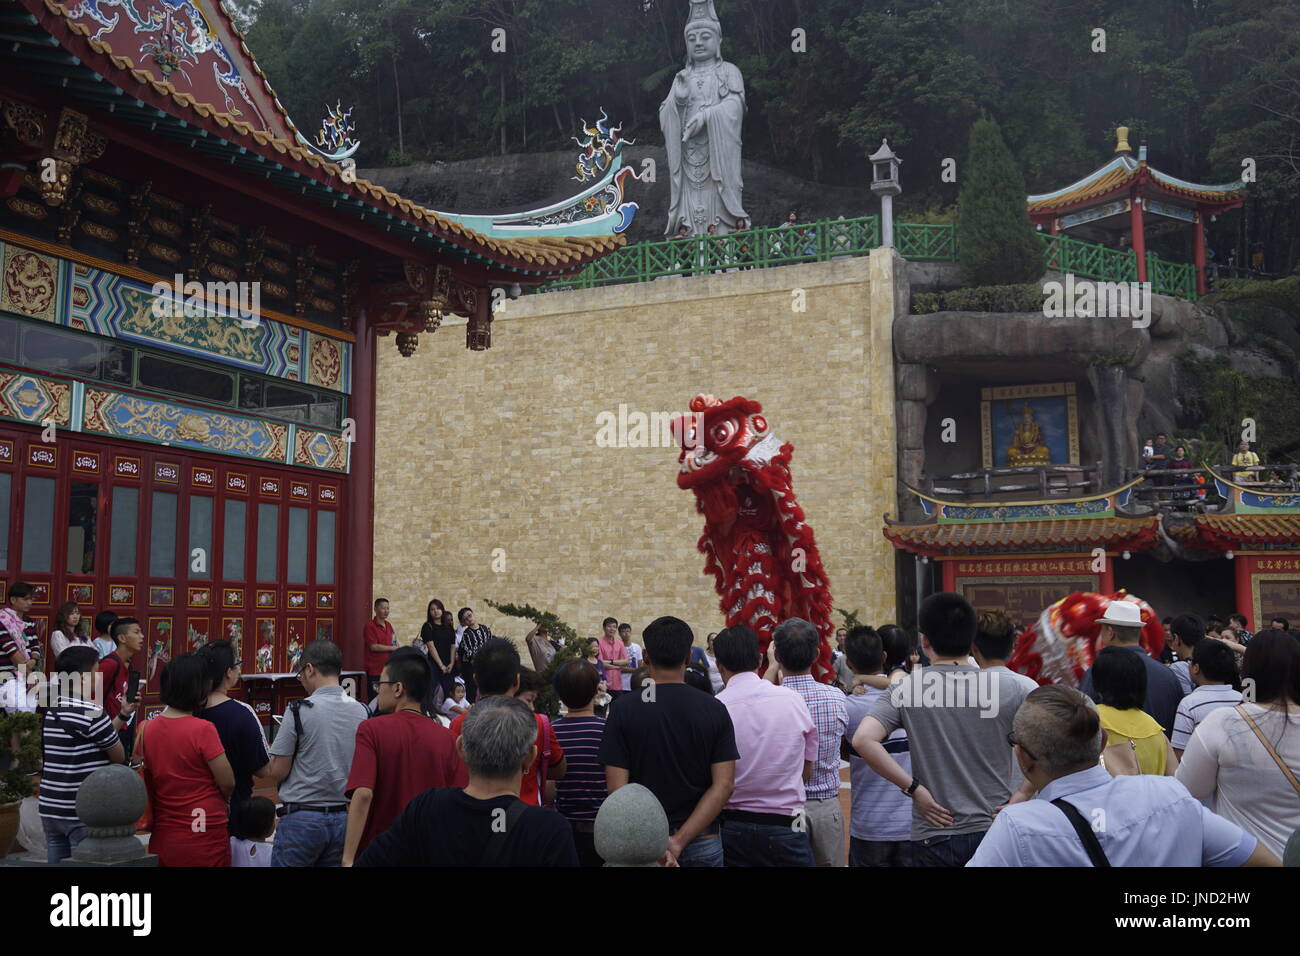 Chinese new year celebrations at  Chin Swee Temple, Genting Highlands, Malaysia Stock Photo